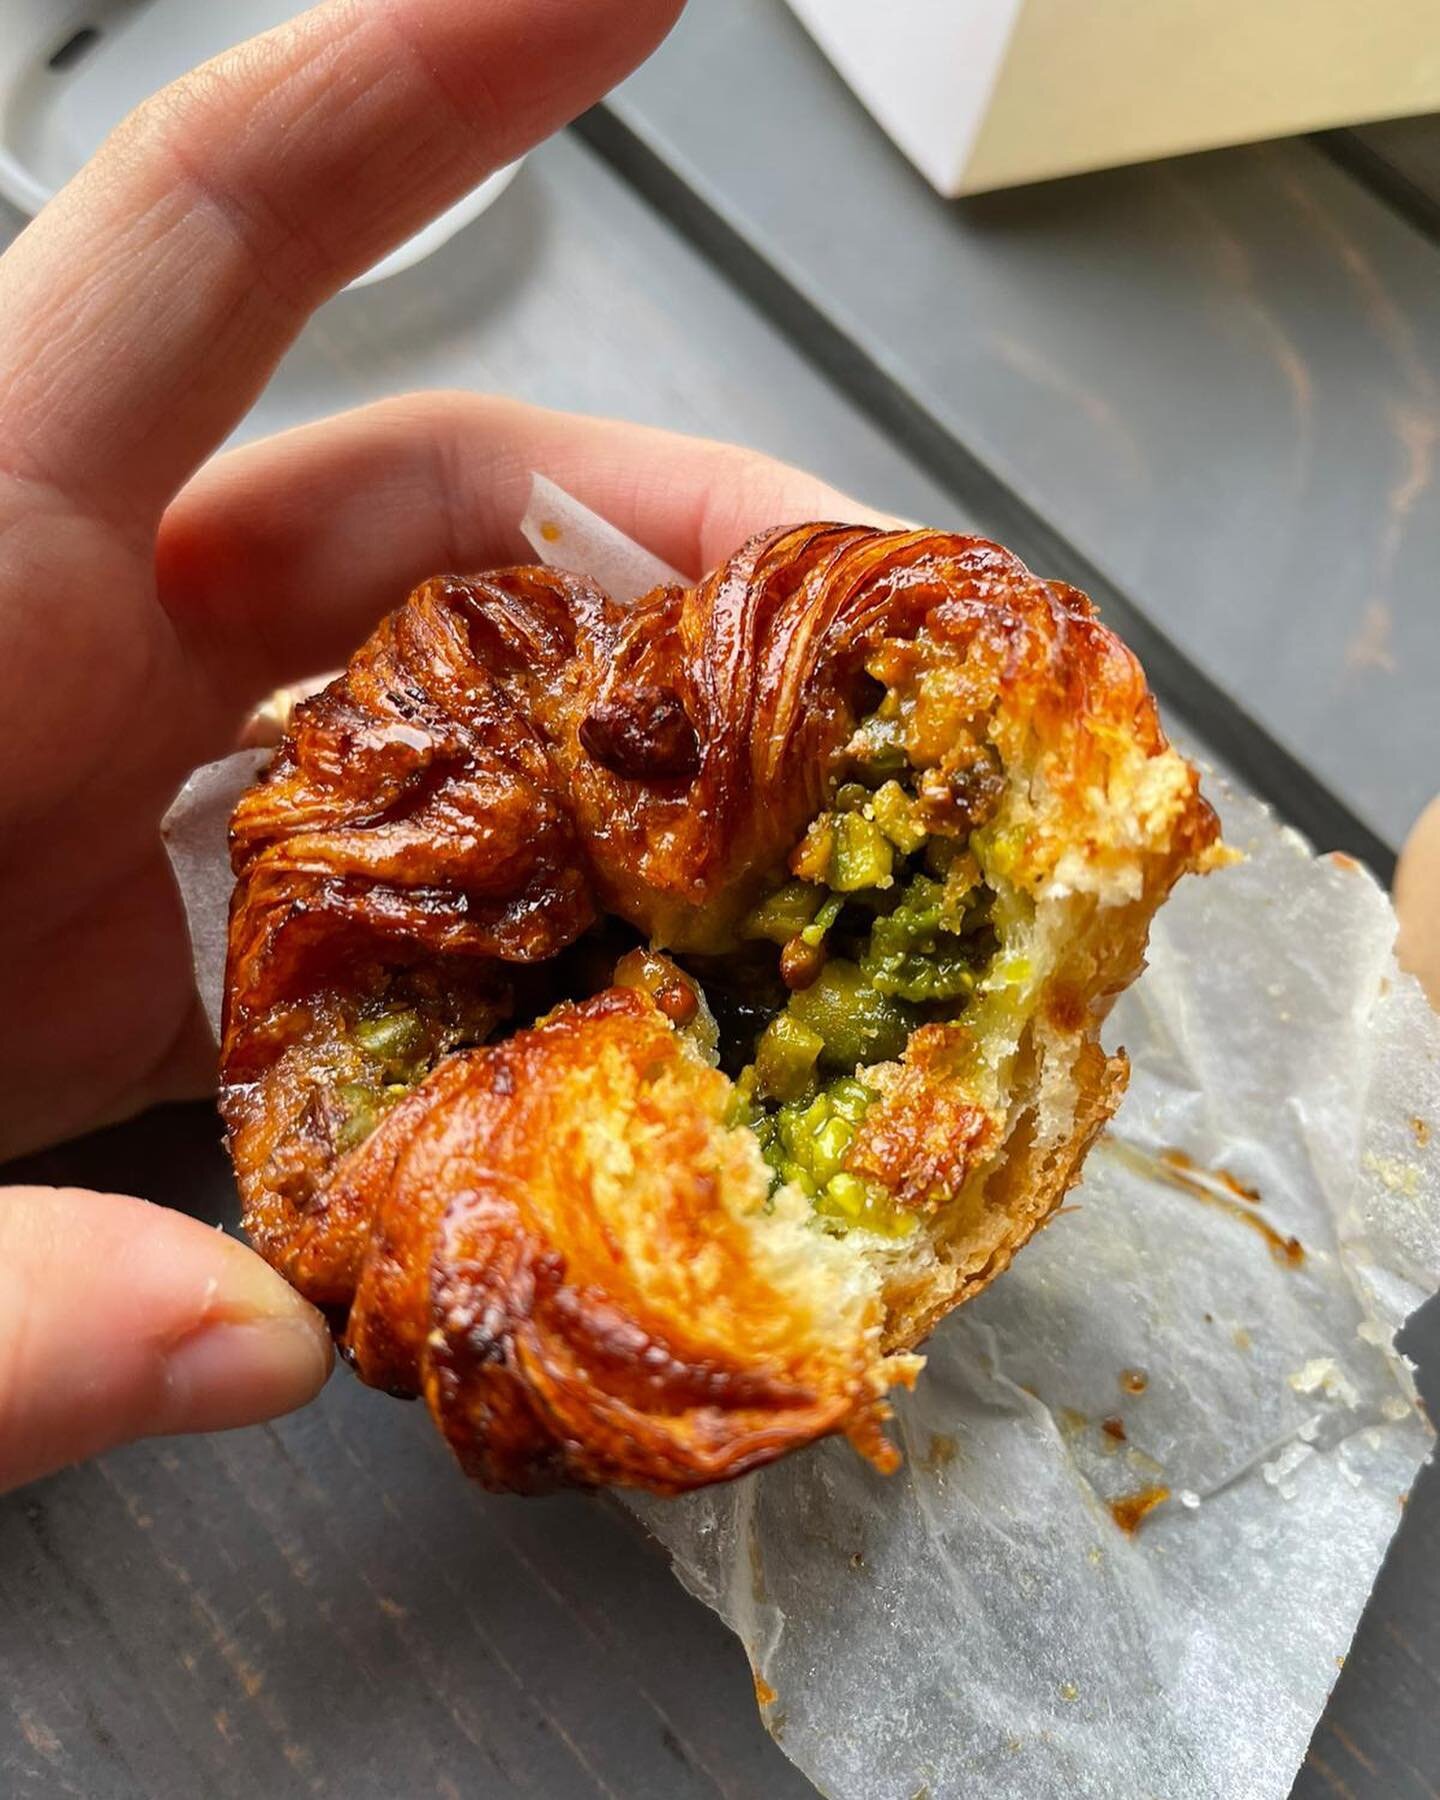 baklava kouign amann from today&rsquo;s pop up! thank you guys for making it amazing!!!! merry crimbo 🥳🥳

📸: @buke_tg